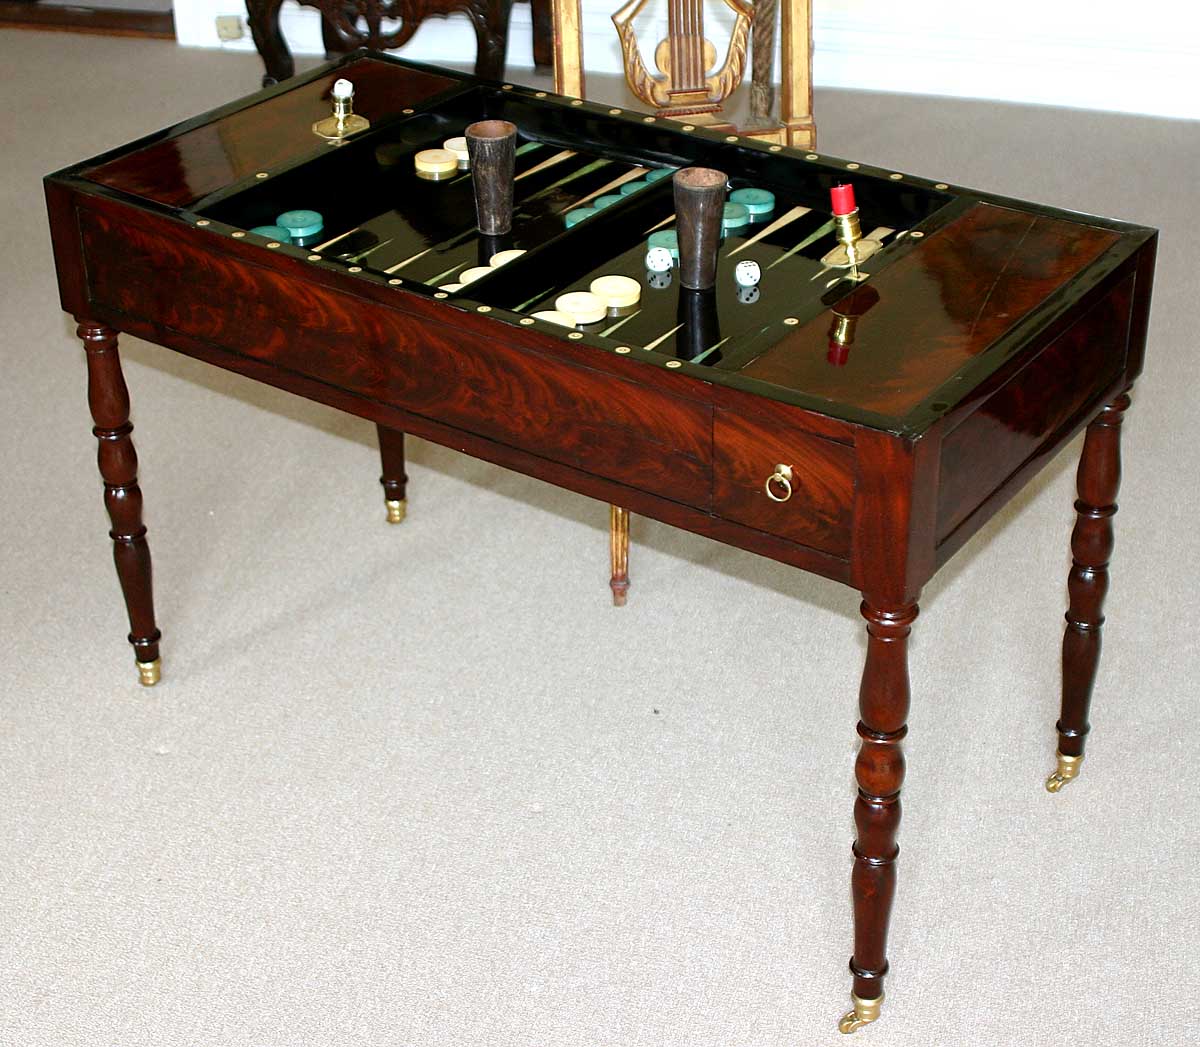 Rare, French, Jacob period tric-trac table